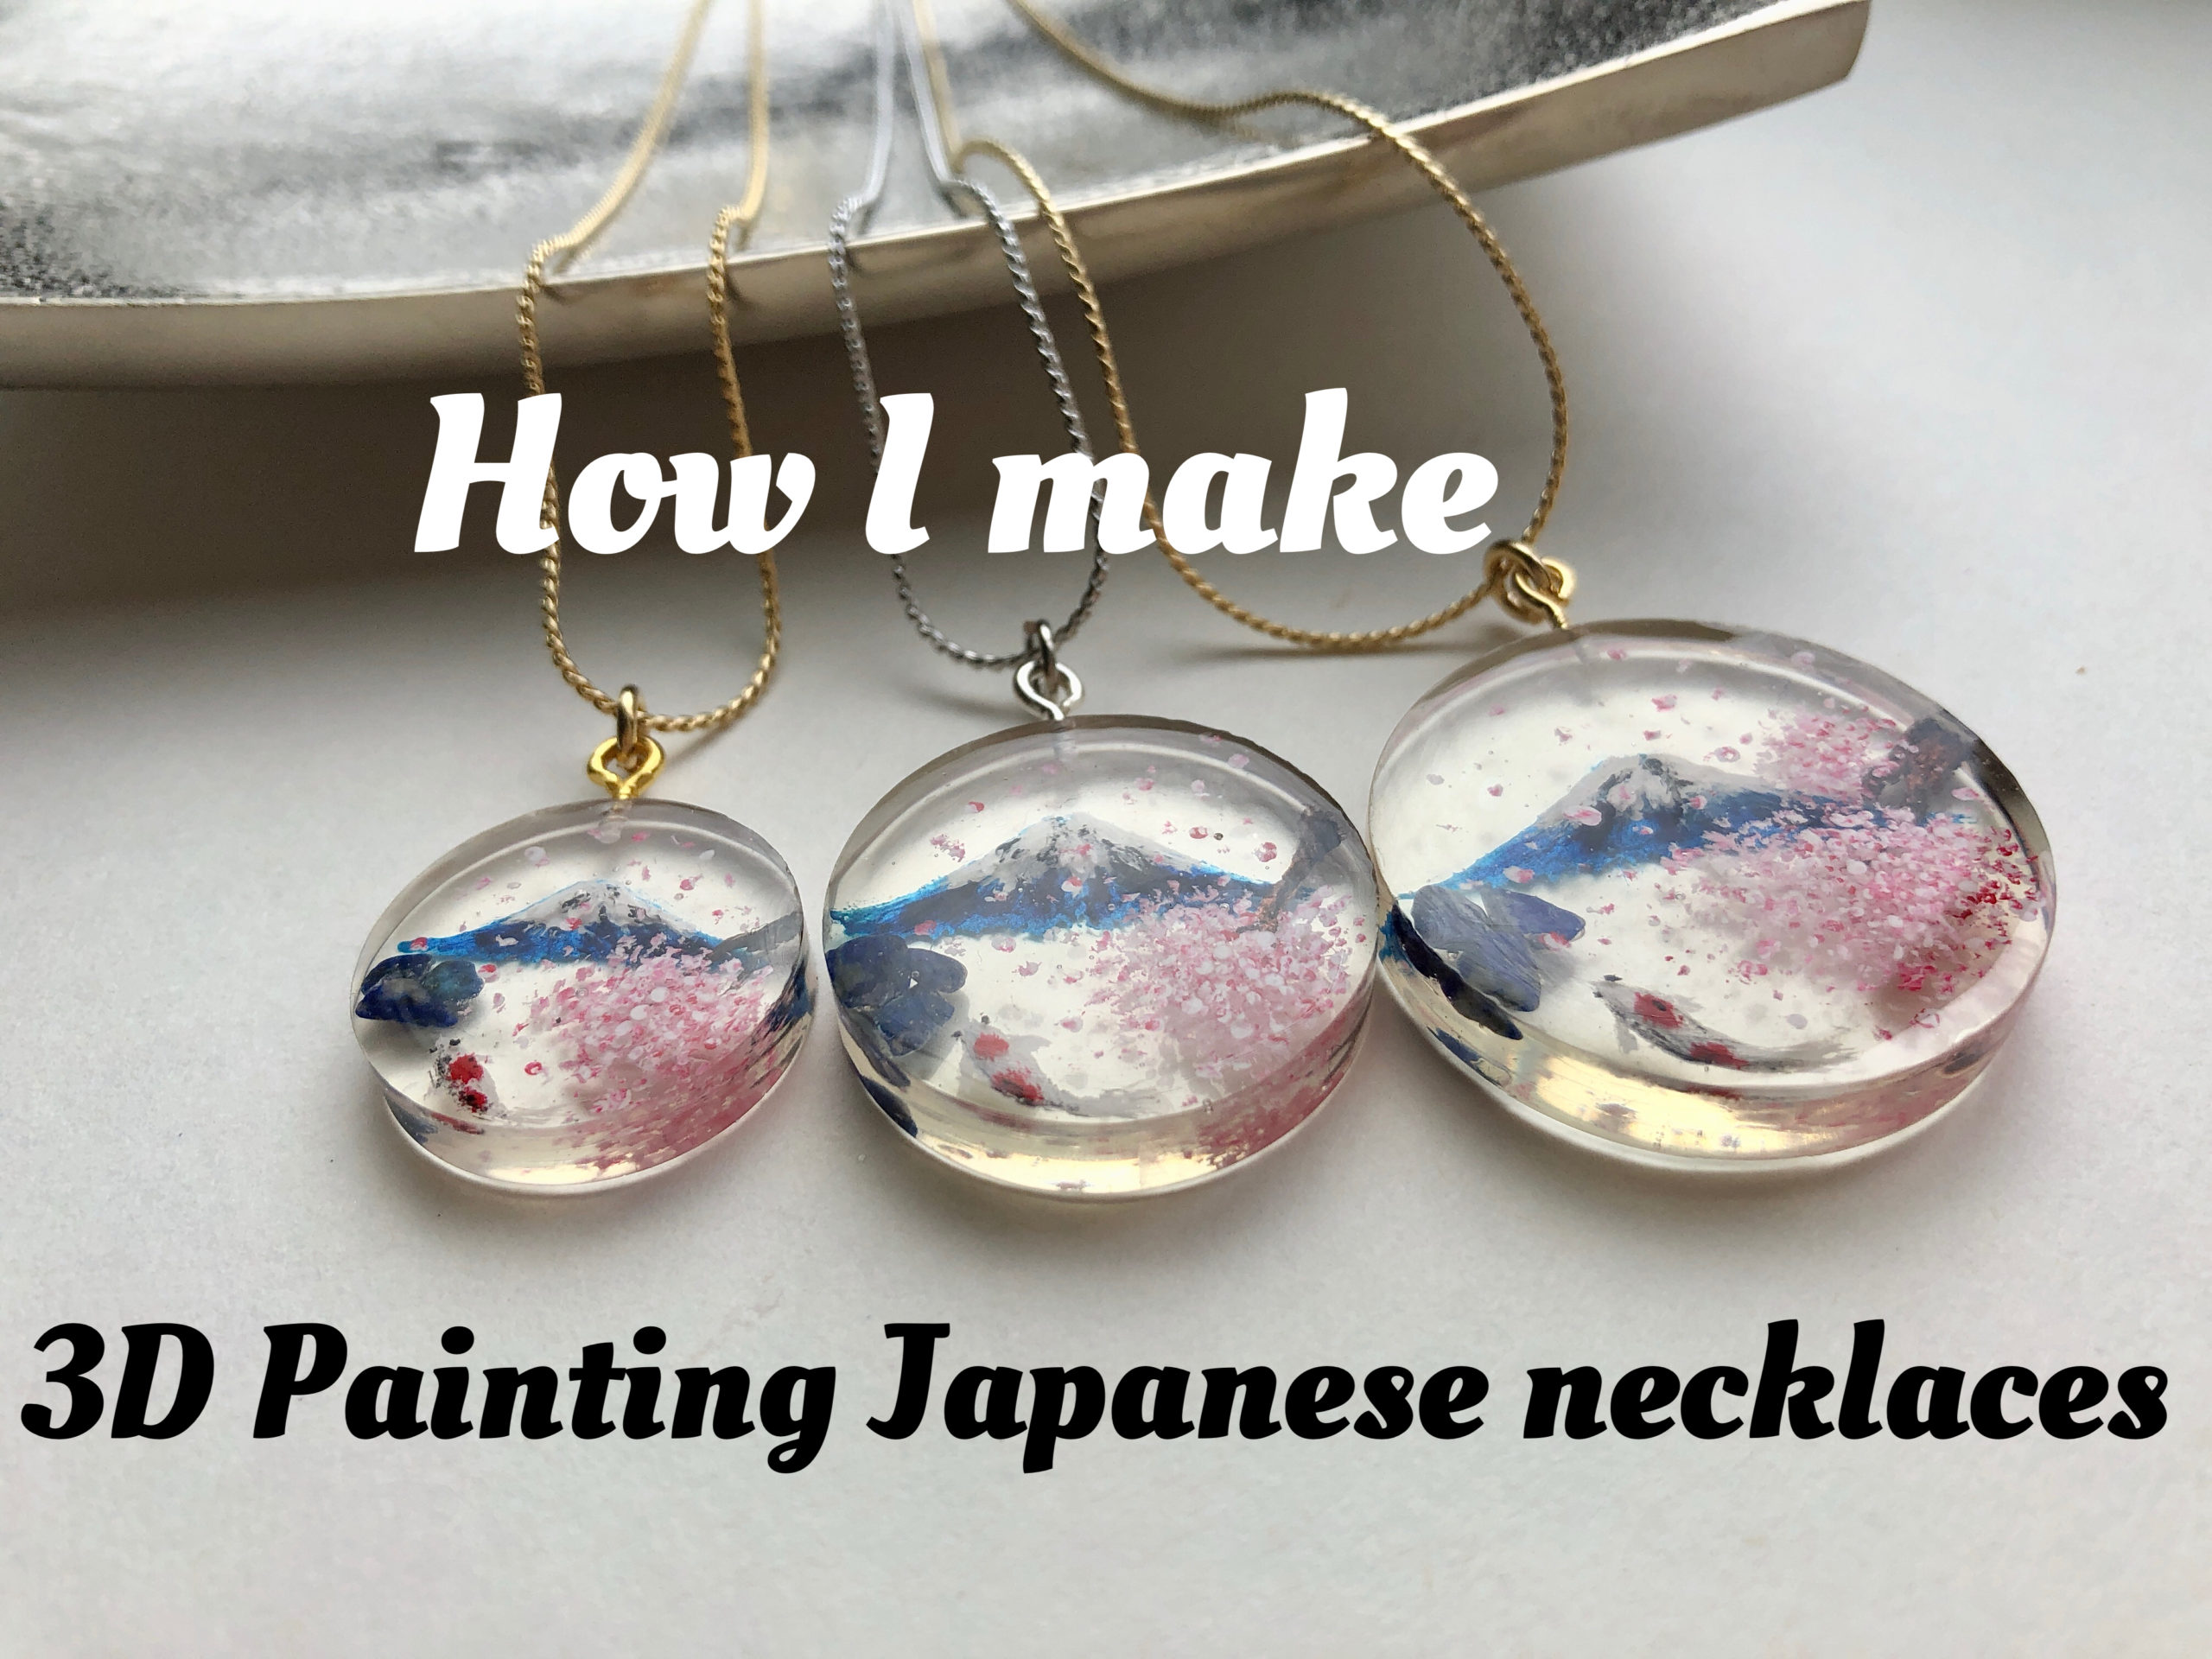 How to make 3D Japanese painting jewelry